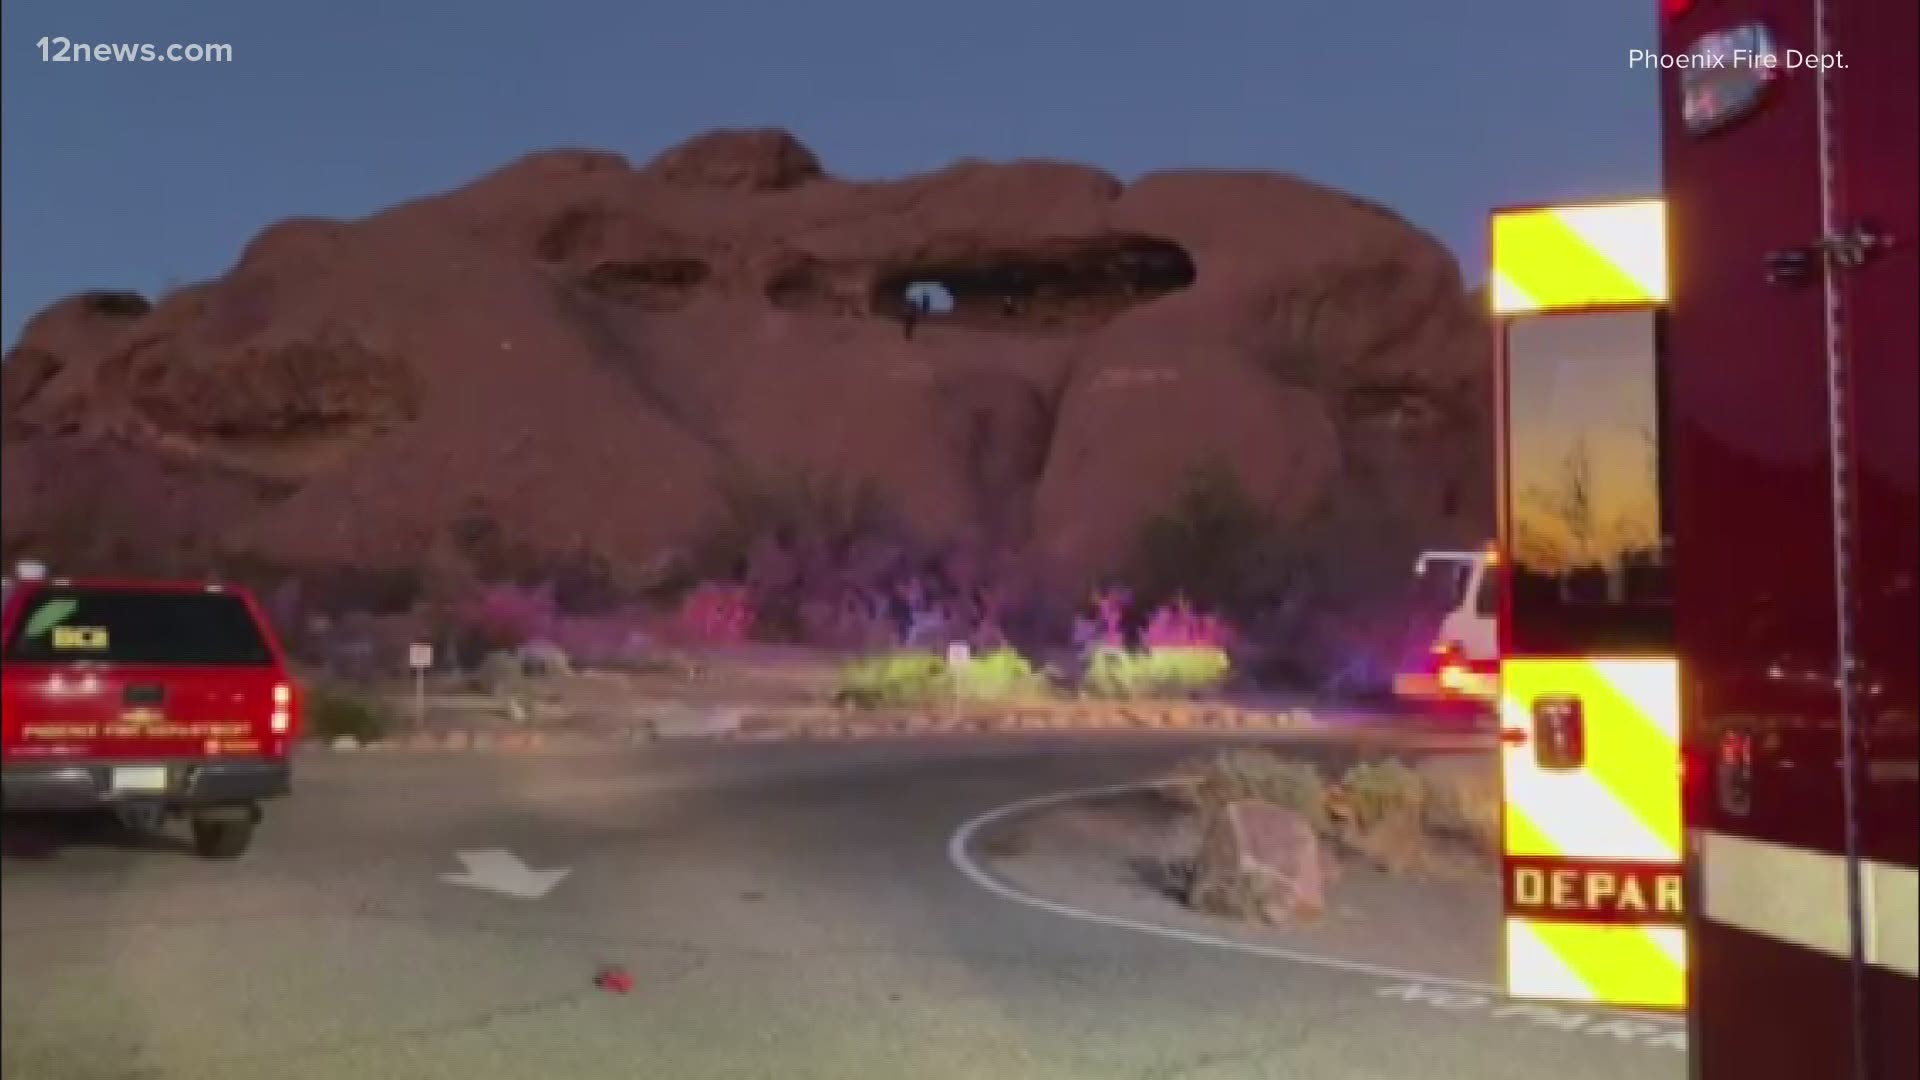 A man in his 20s fell 30 to 40 feet while hiking at Papago Park, according to the Phoneix Fire Department.  He was transported to a trauma hospital.